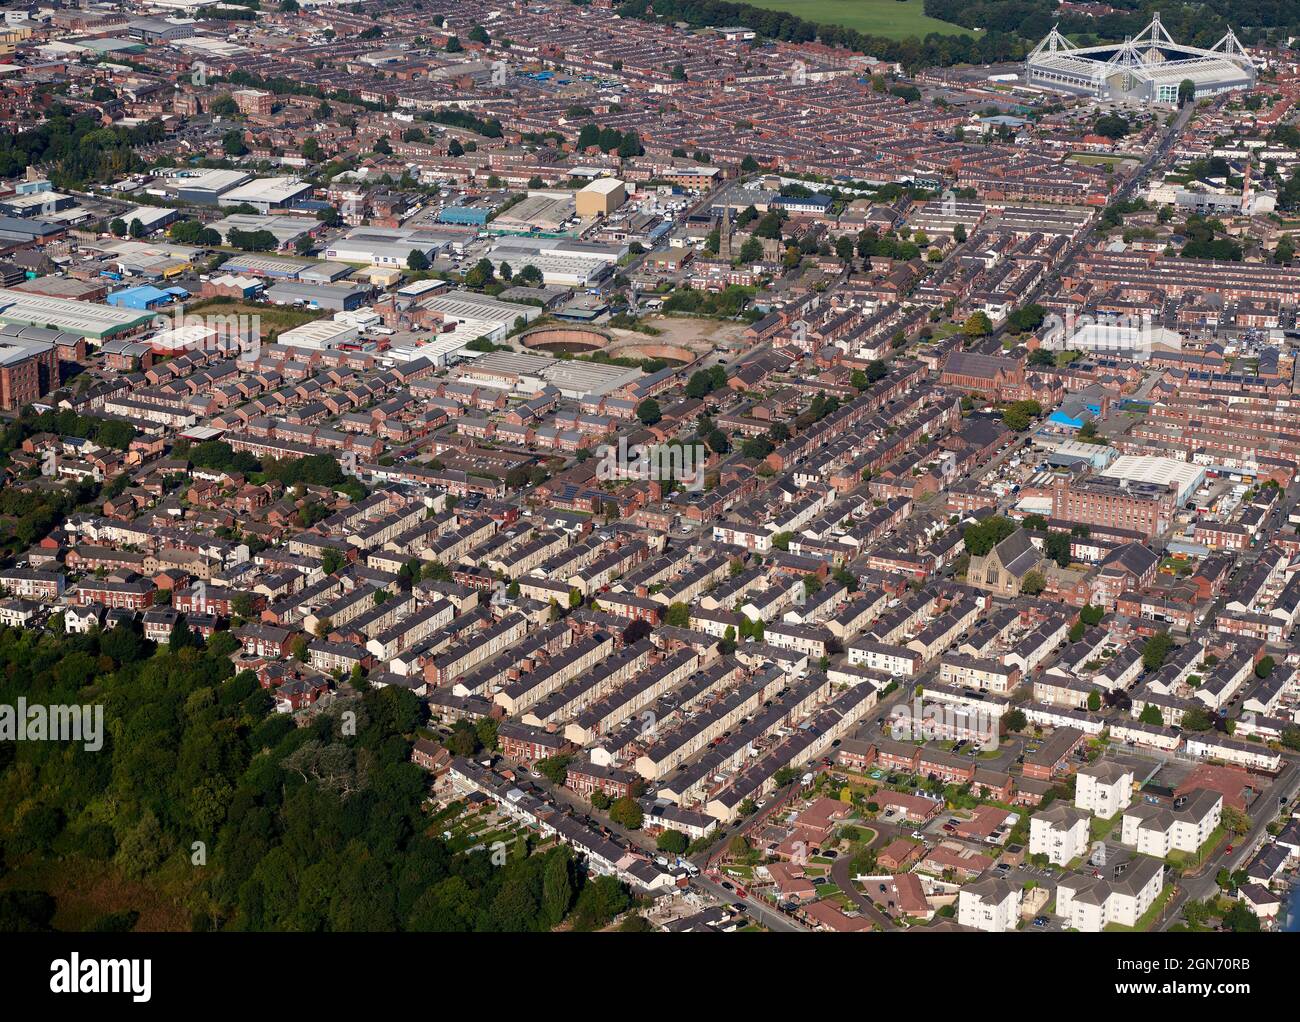 An aerial photograph of terraced housing at the city of Preston, north west England, UK Stock Photo